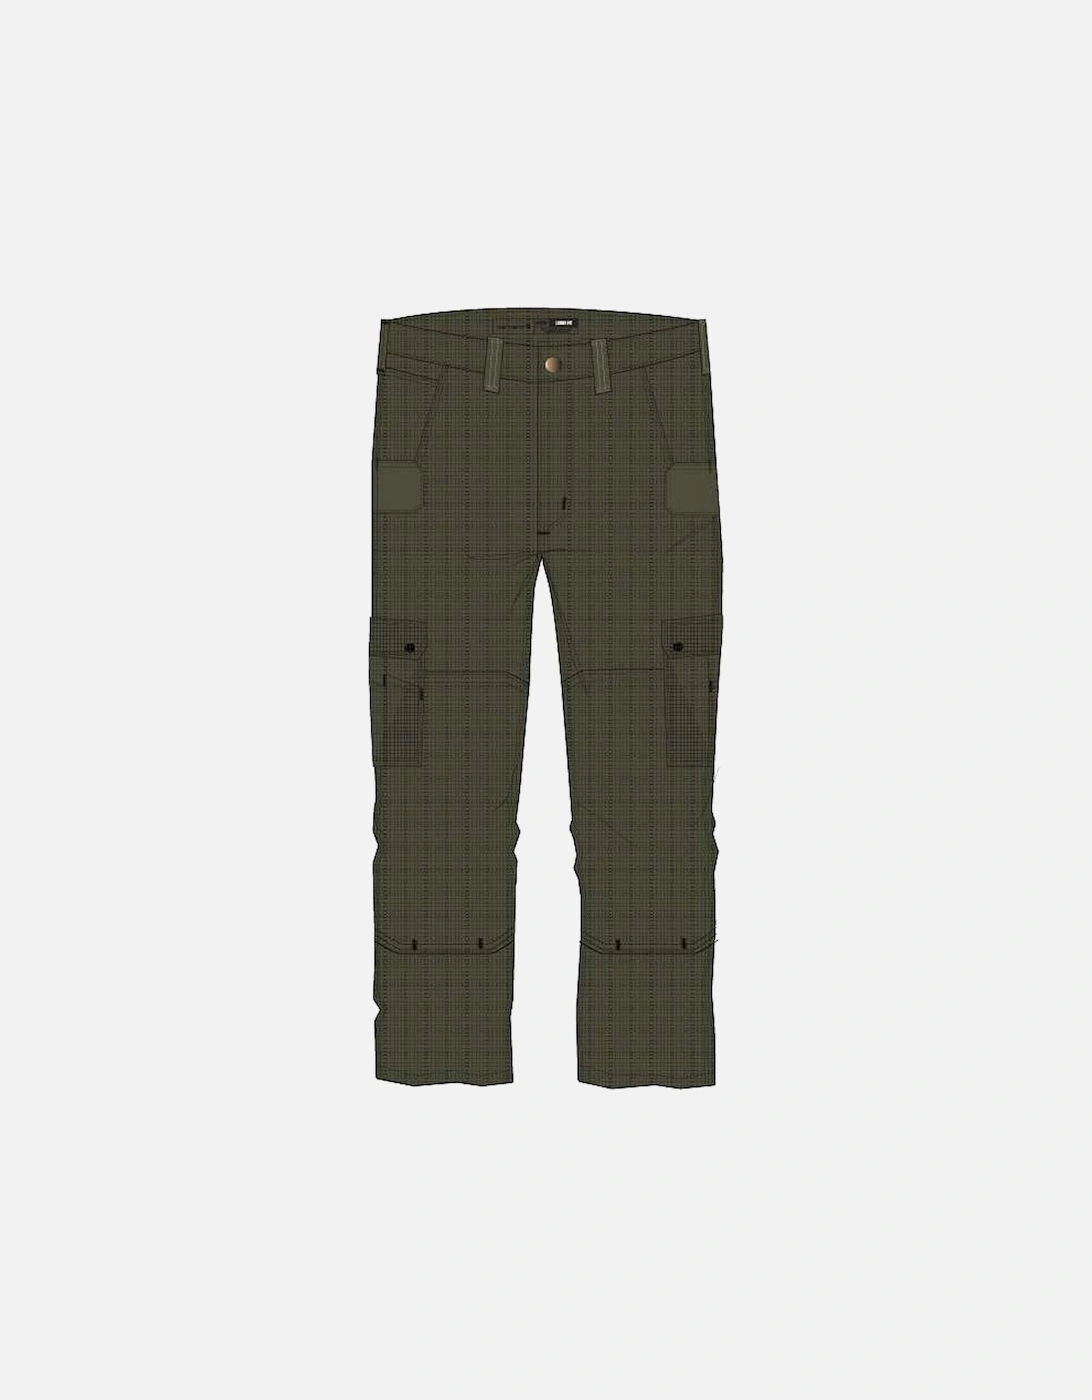 Carhartt Mens Relaxed Fit Ripstop Cargo Work Pants